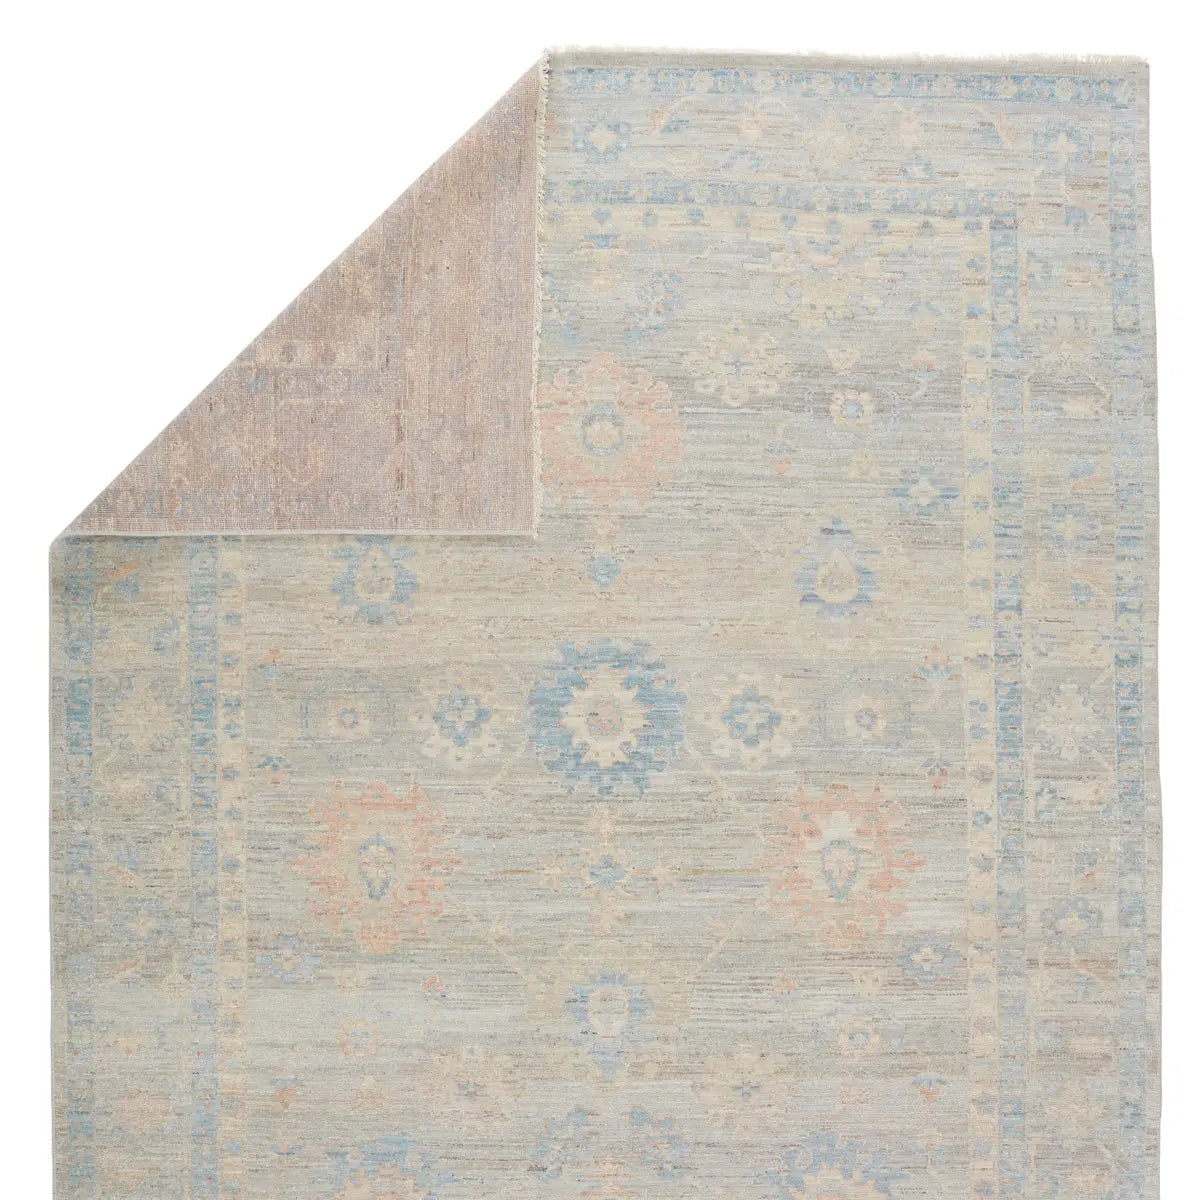 The Orenda Kerensa Rug features heirloom-quality designs of muted and uniquely updated Old World patterns. The Kerensa area rug boasts a beautifully washed medallion motif with ornate and fine-lined details. Amethyst Home provides interior design services, furniture, rugs, and lighting in the Des Moines metro area.